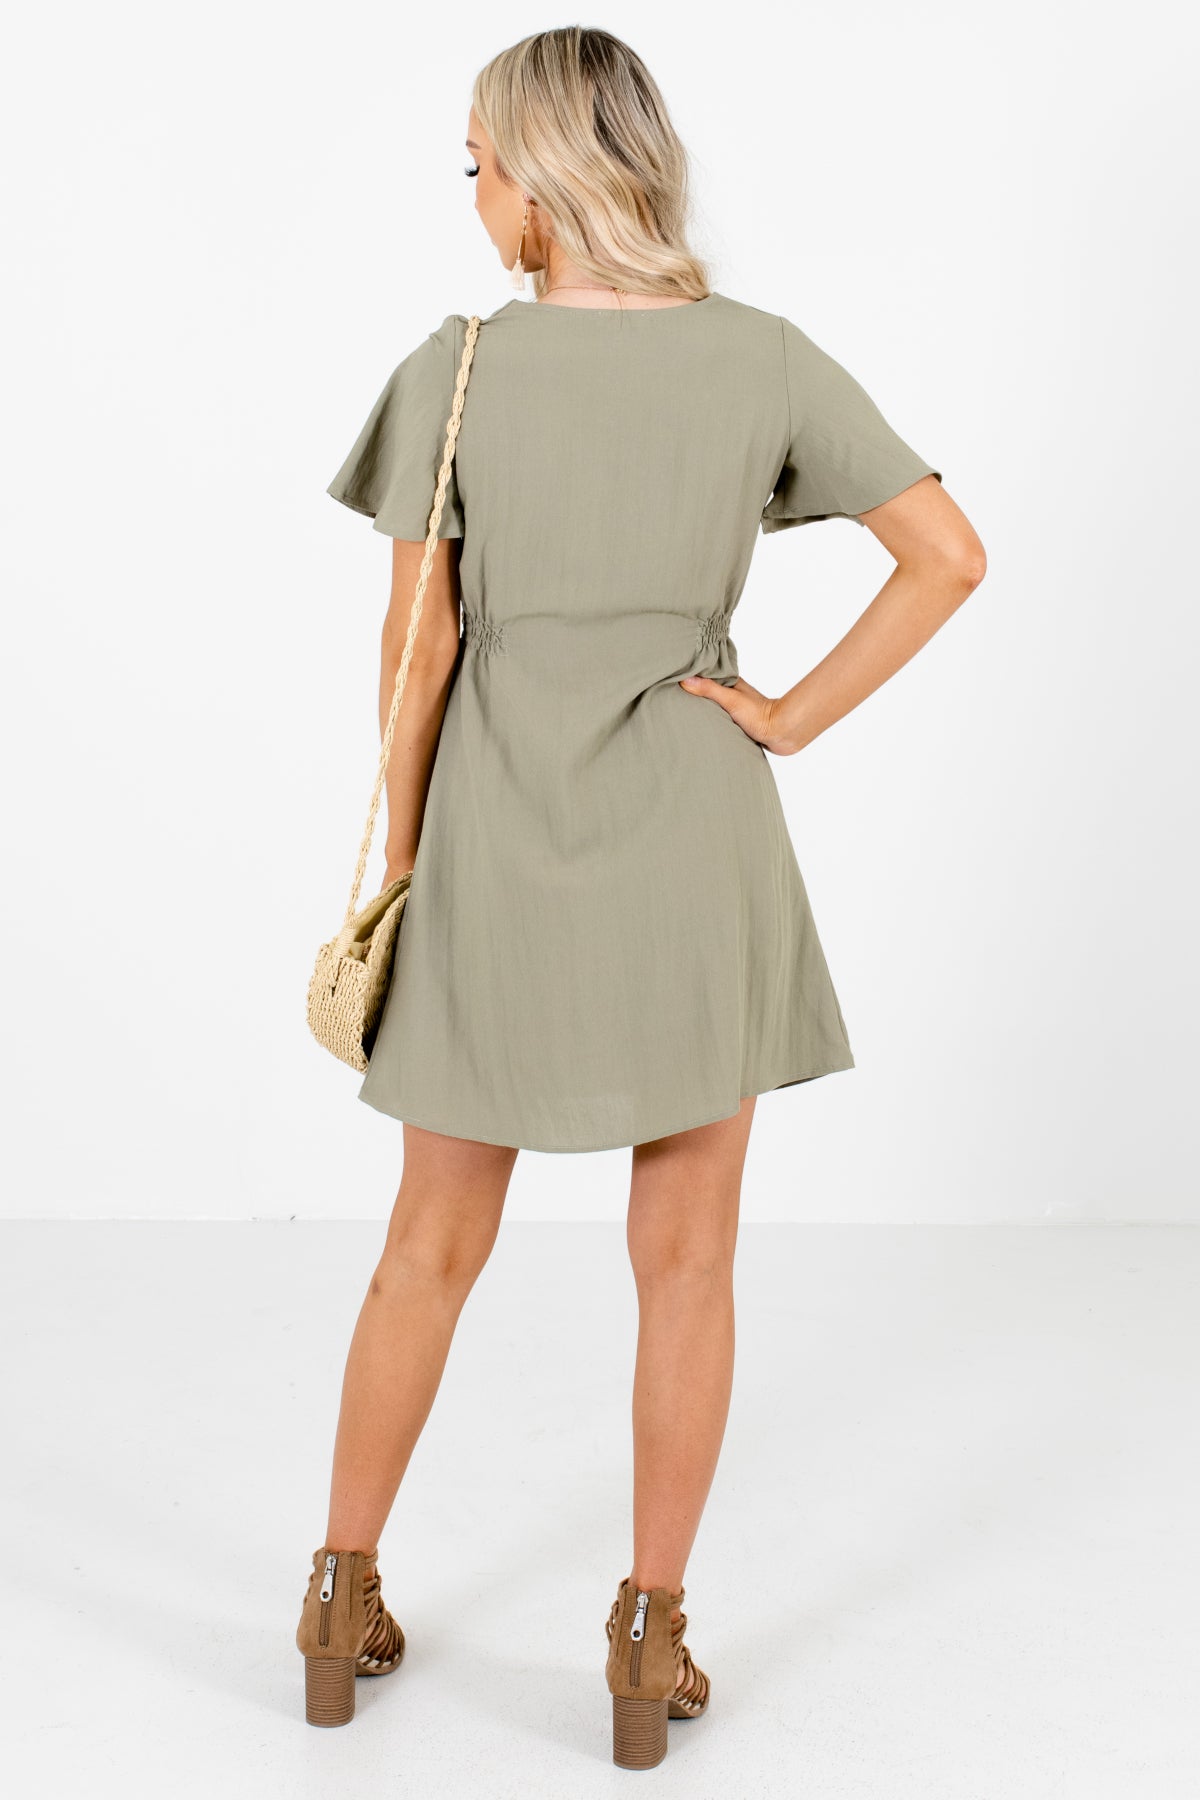 Women's Olive Smocked Accented Boutique Mini Dress